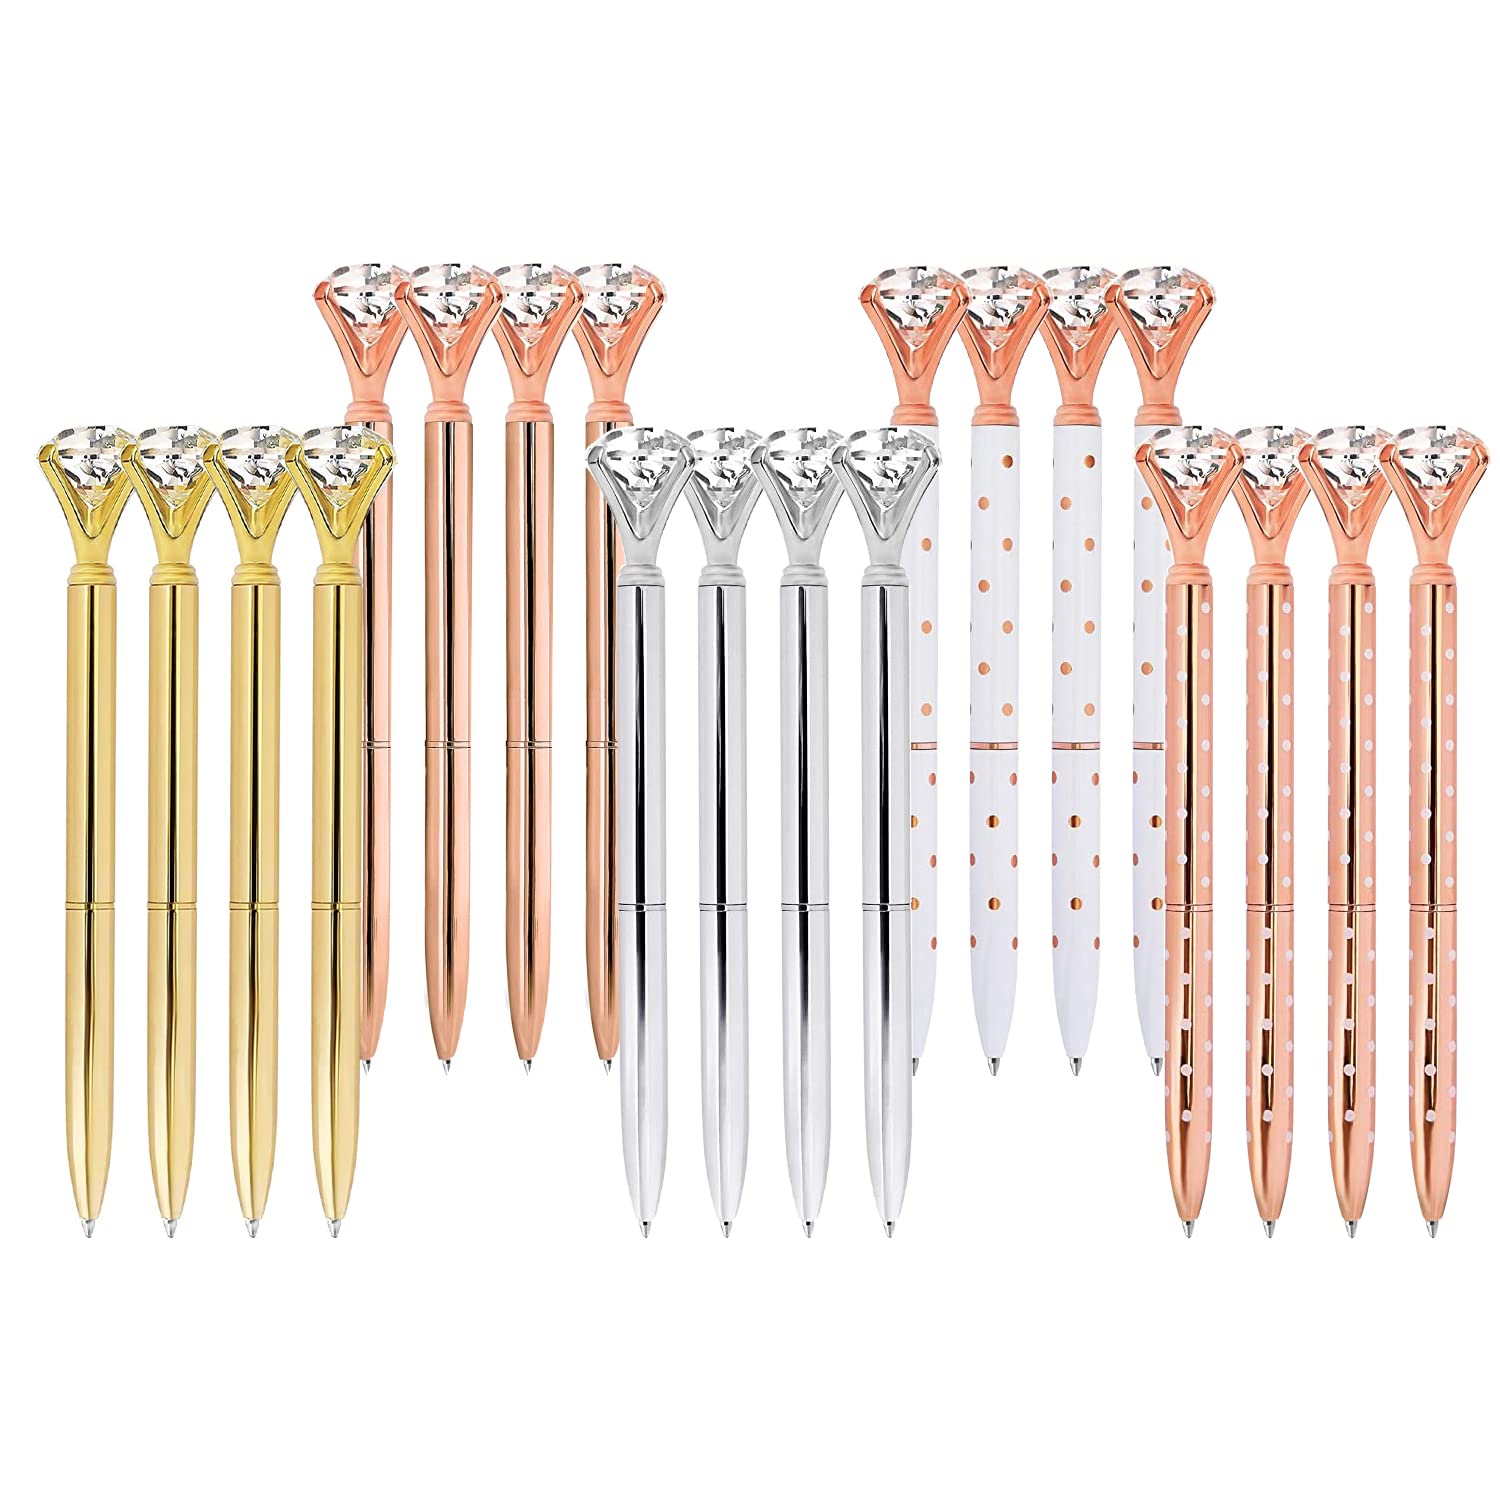 ETCBUYS Multi-Color Diamond Ballpoint Pen for Stylish Fancy Office Supplies- Pens-GRGSWRGD-16PK